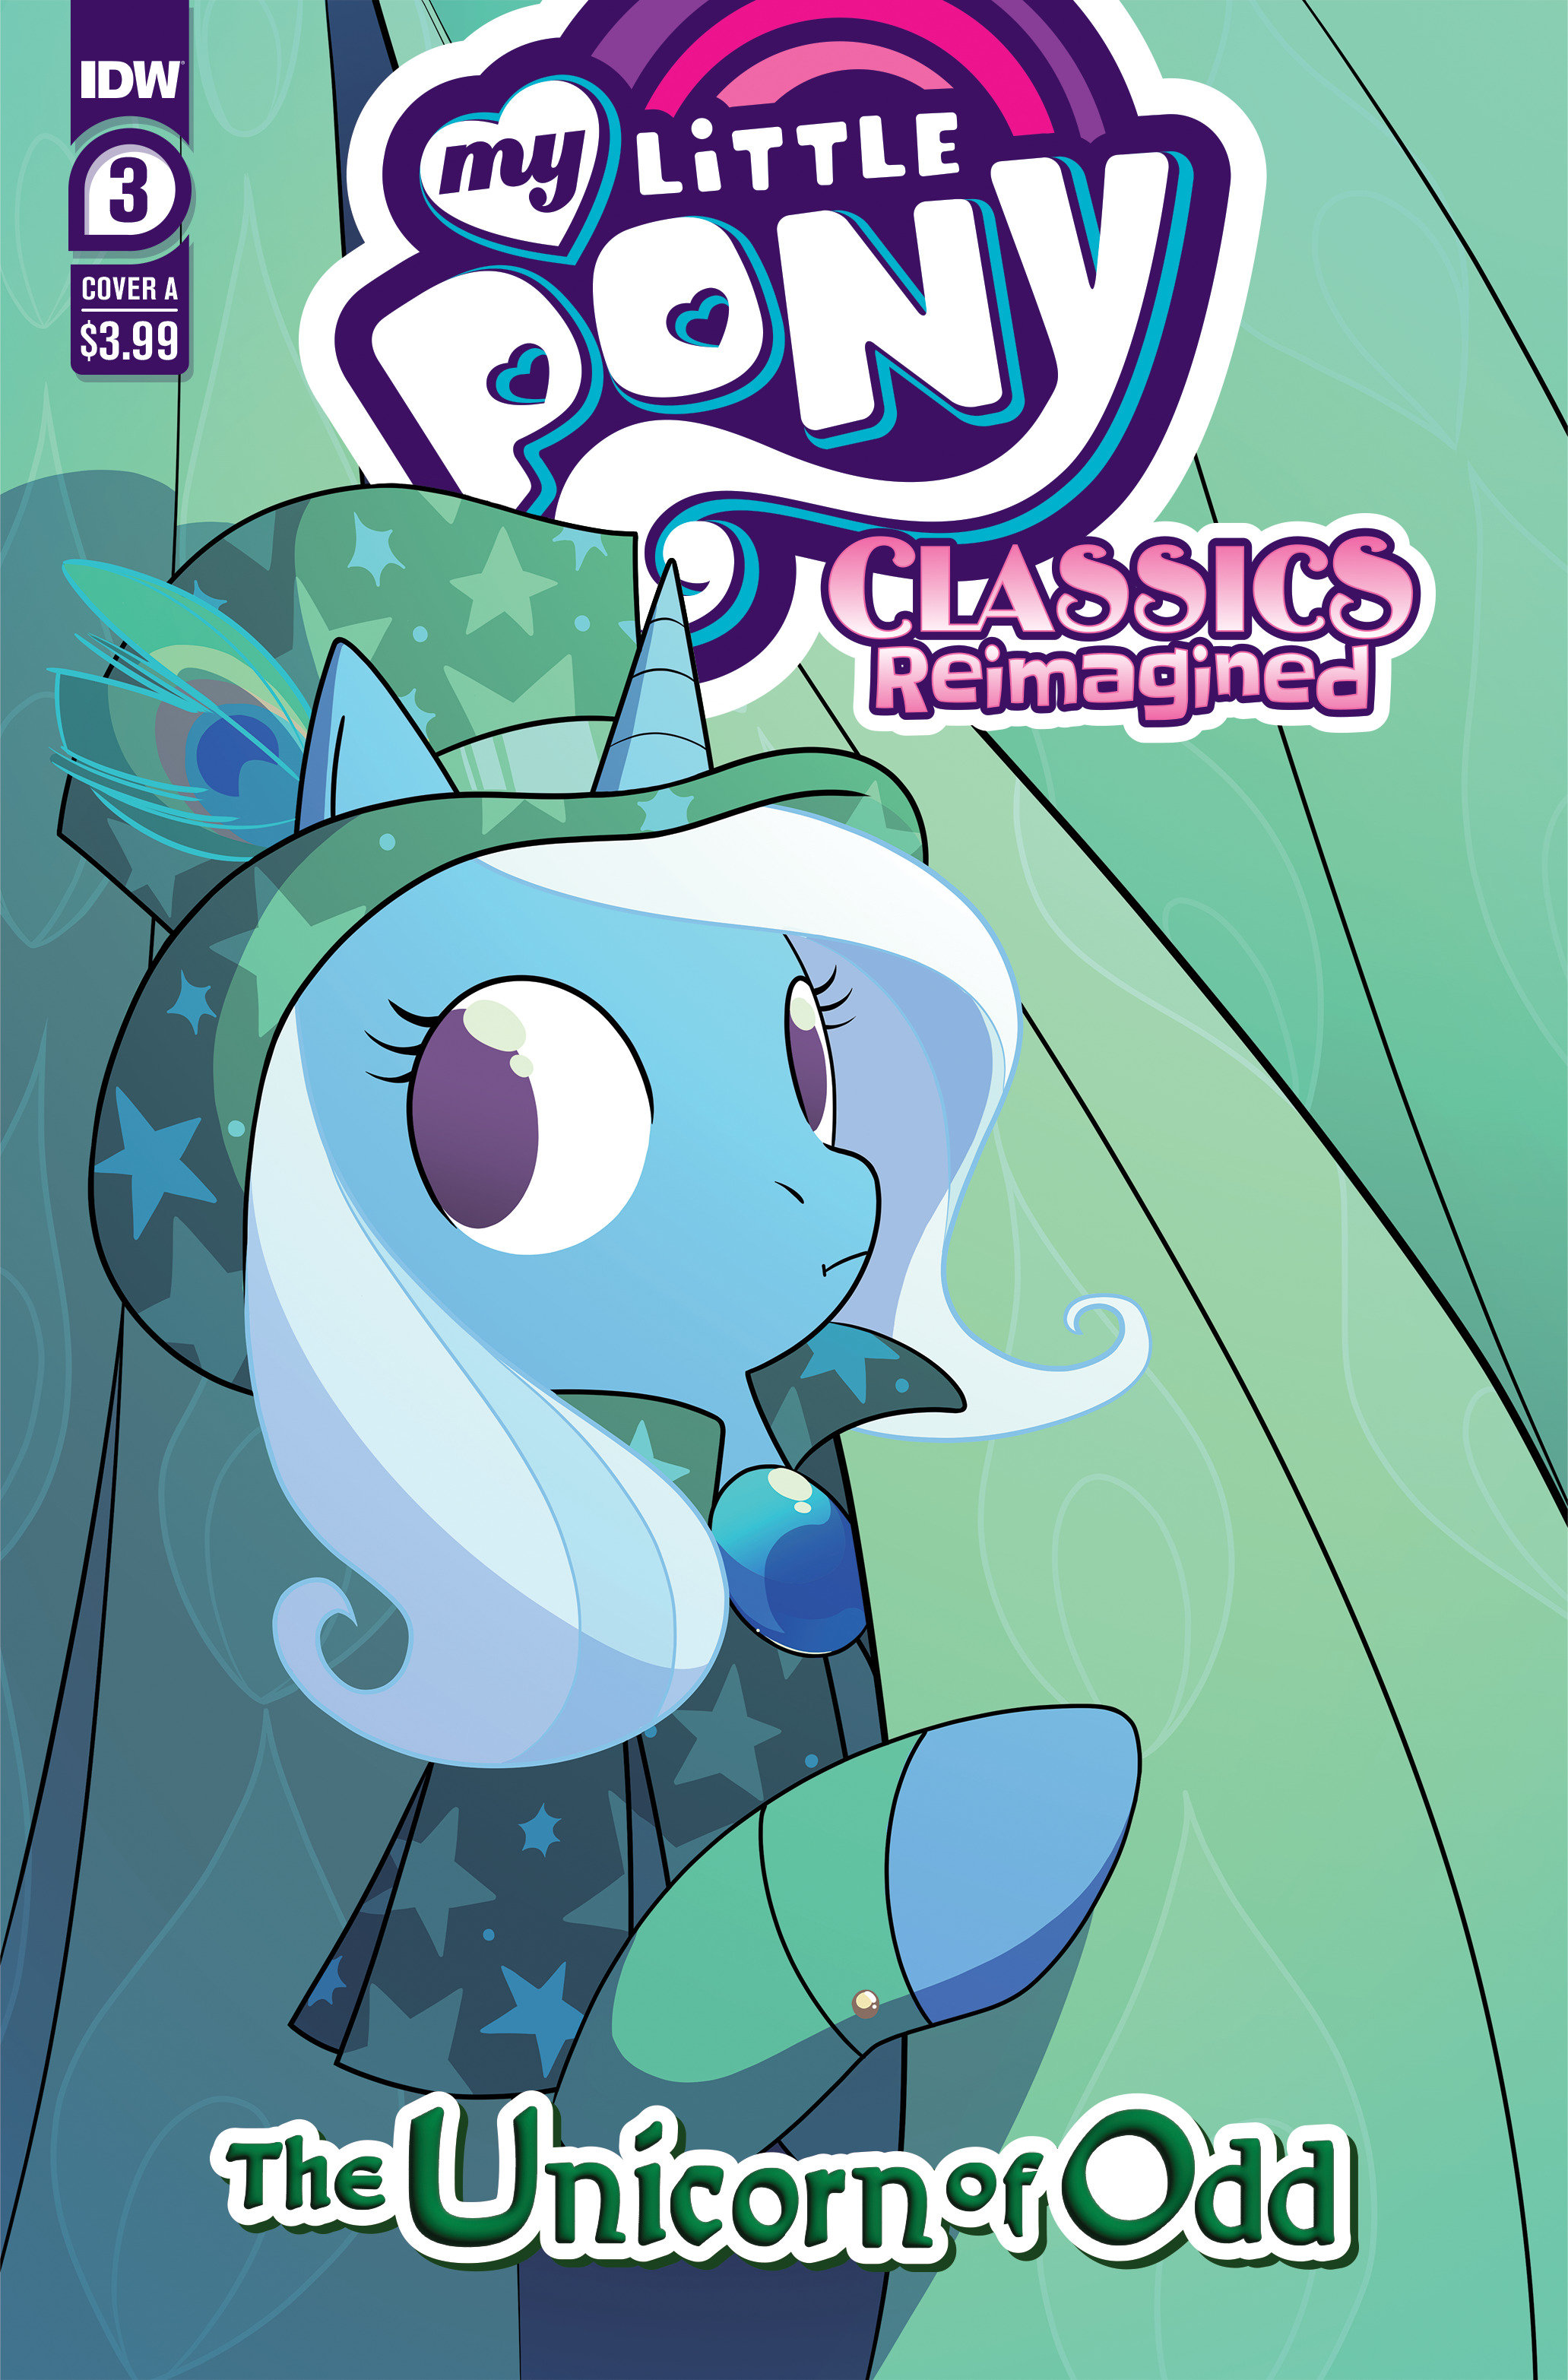 3167183__safe_artist-colon-jenna+ayoub_official+comic_trixie_pony_unicorn_g4_idw_official_spoiler-colon-comic_comic+cover_curtains_female_hat_hiding_high+res_ma.jpg